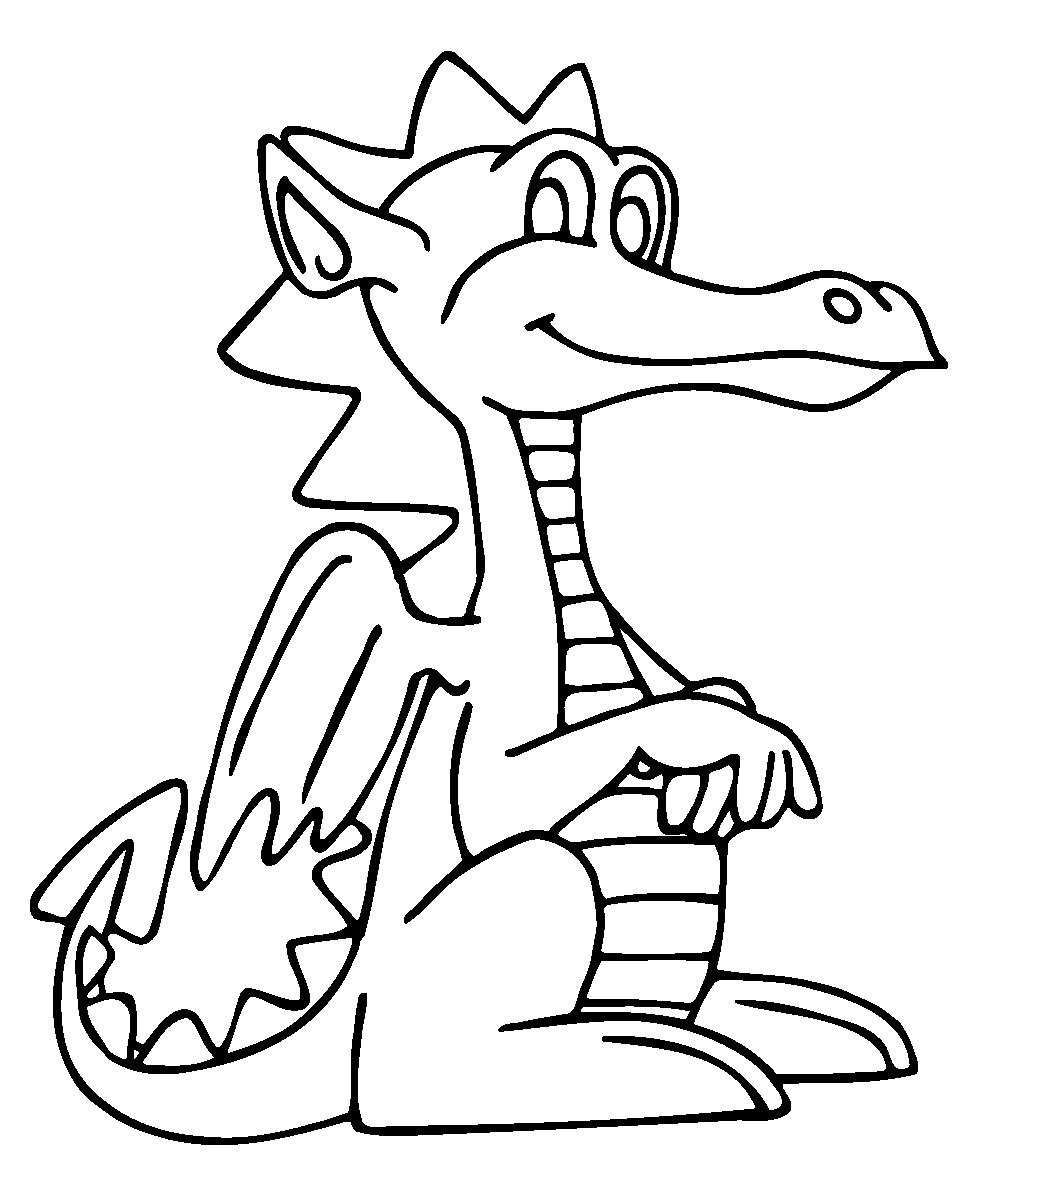 Cute Dragon Baby - ClipArt Best